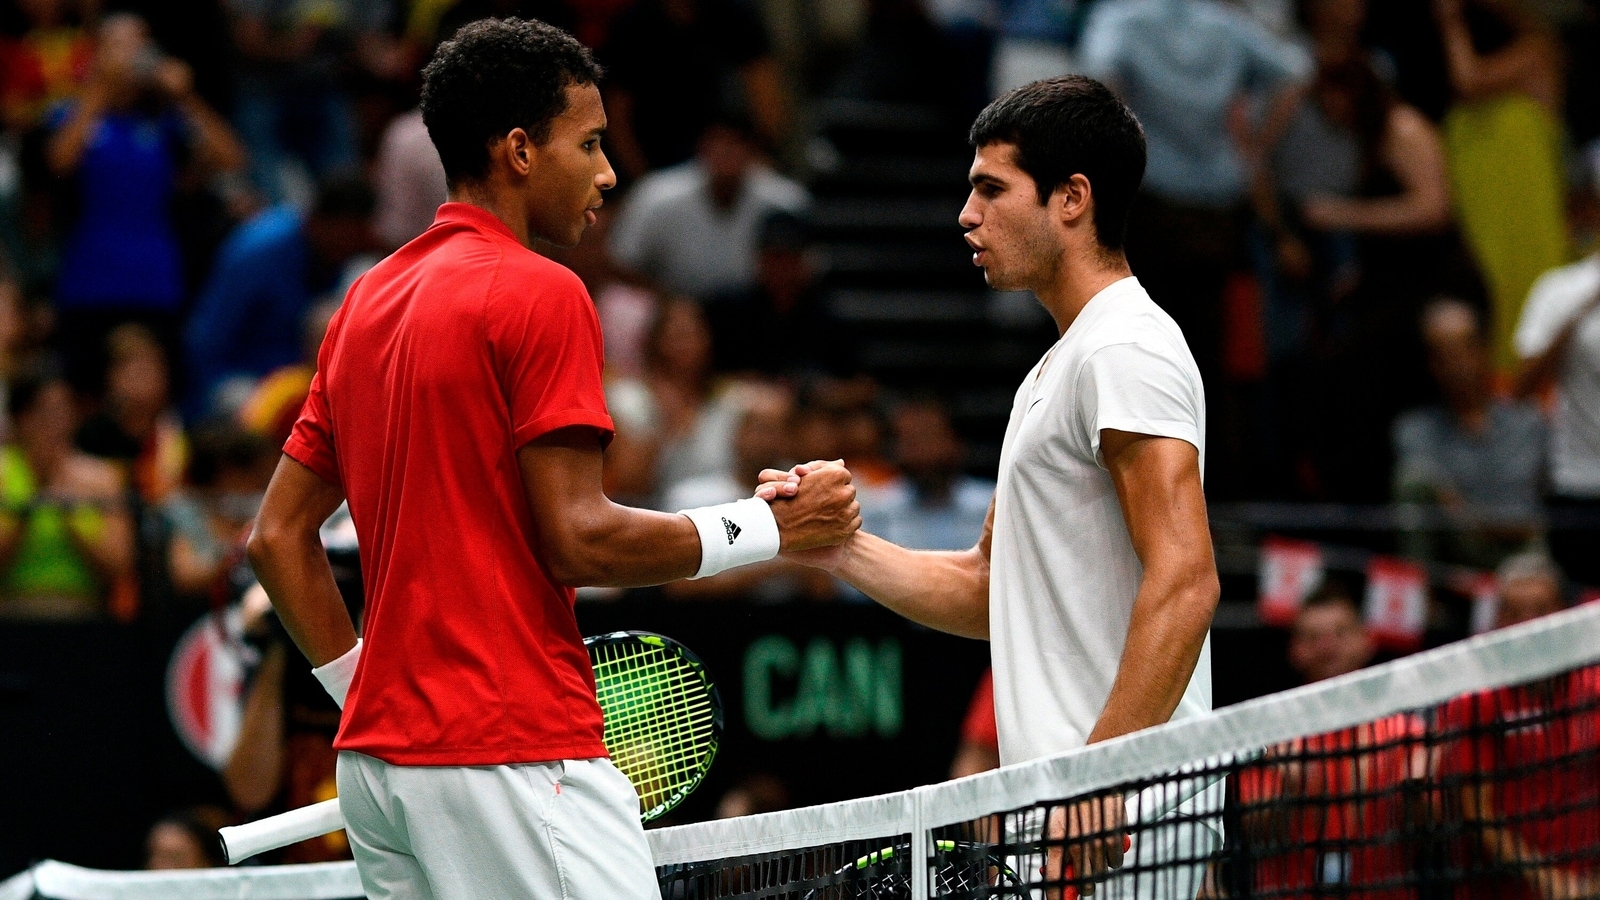 Davis Cup Carlos Alcaraz loses to AugerAliassime in first match as